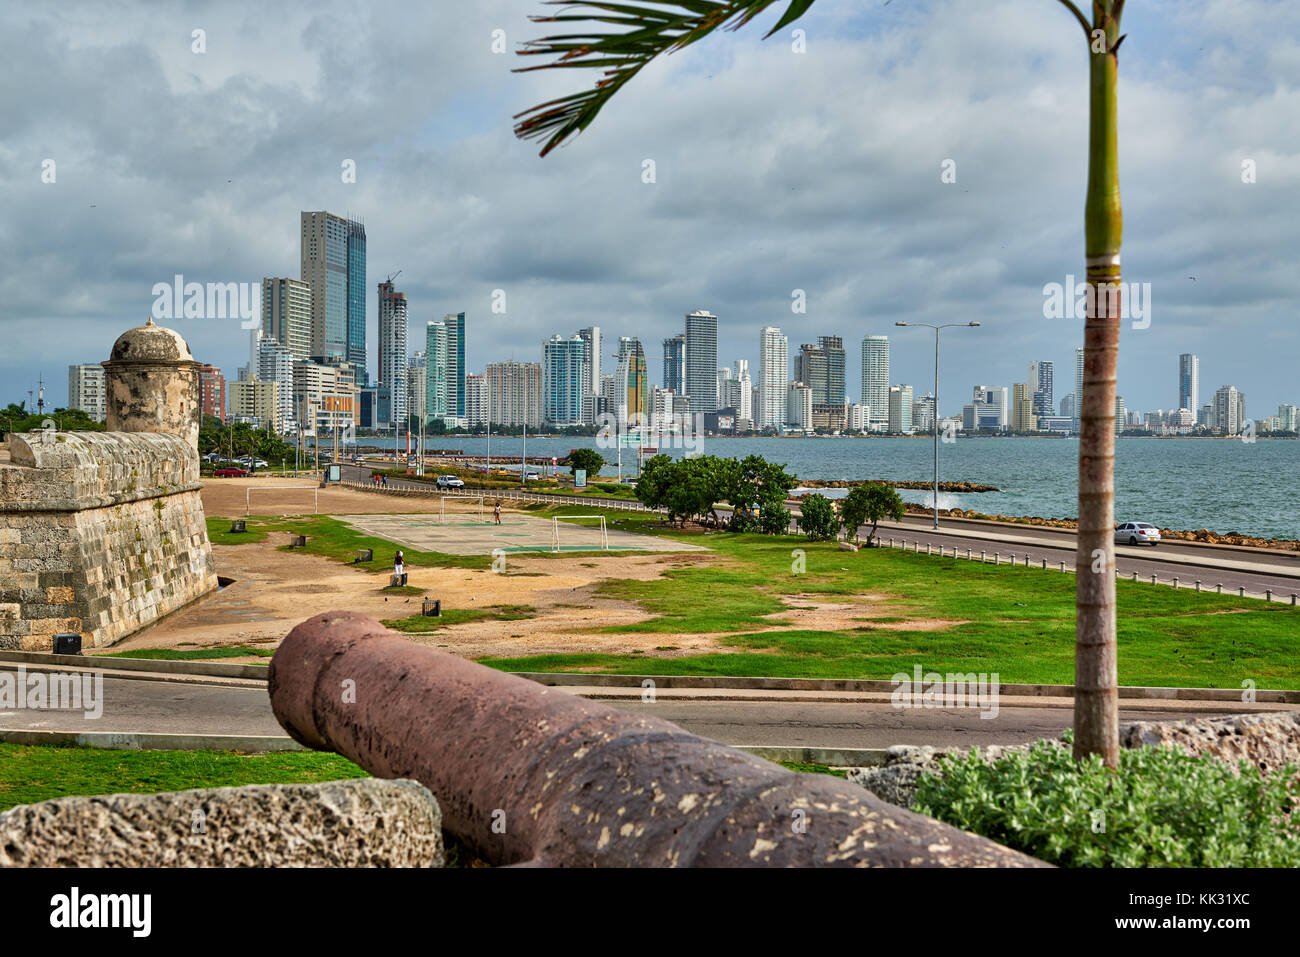 view over cannon of old town to skyline of new district Bocagrande, Cartagena de Indias, Colombia, South America Stock Photo